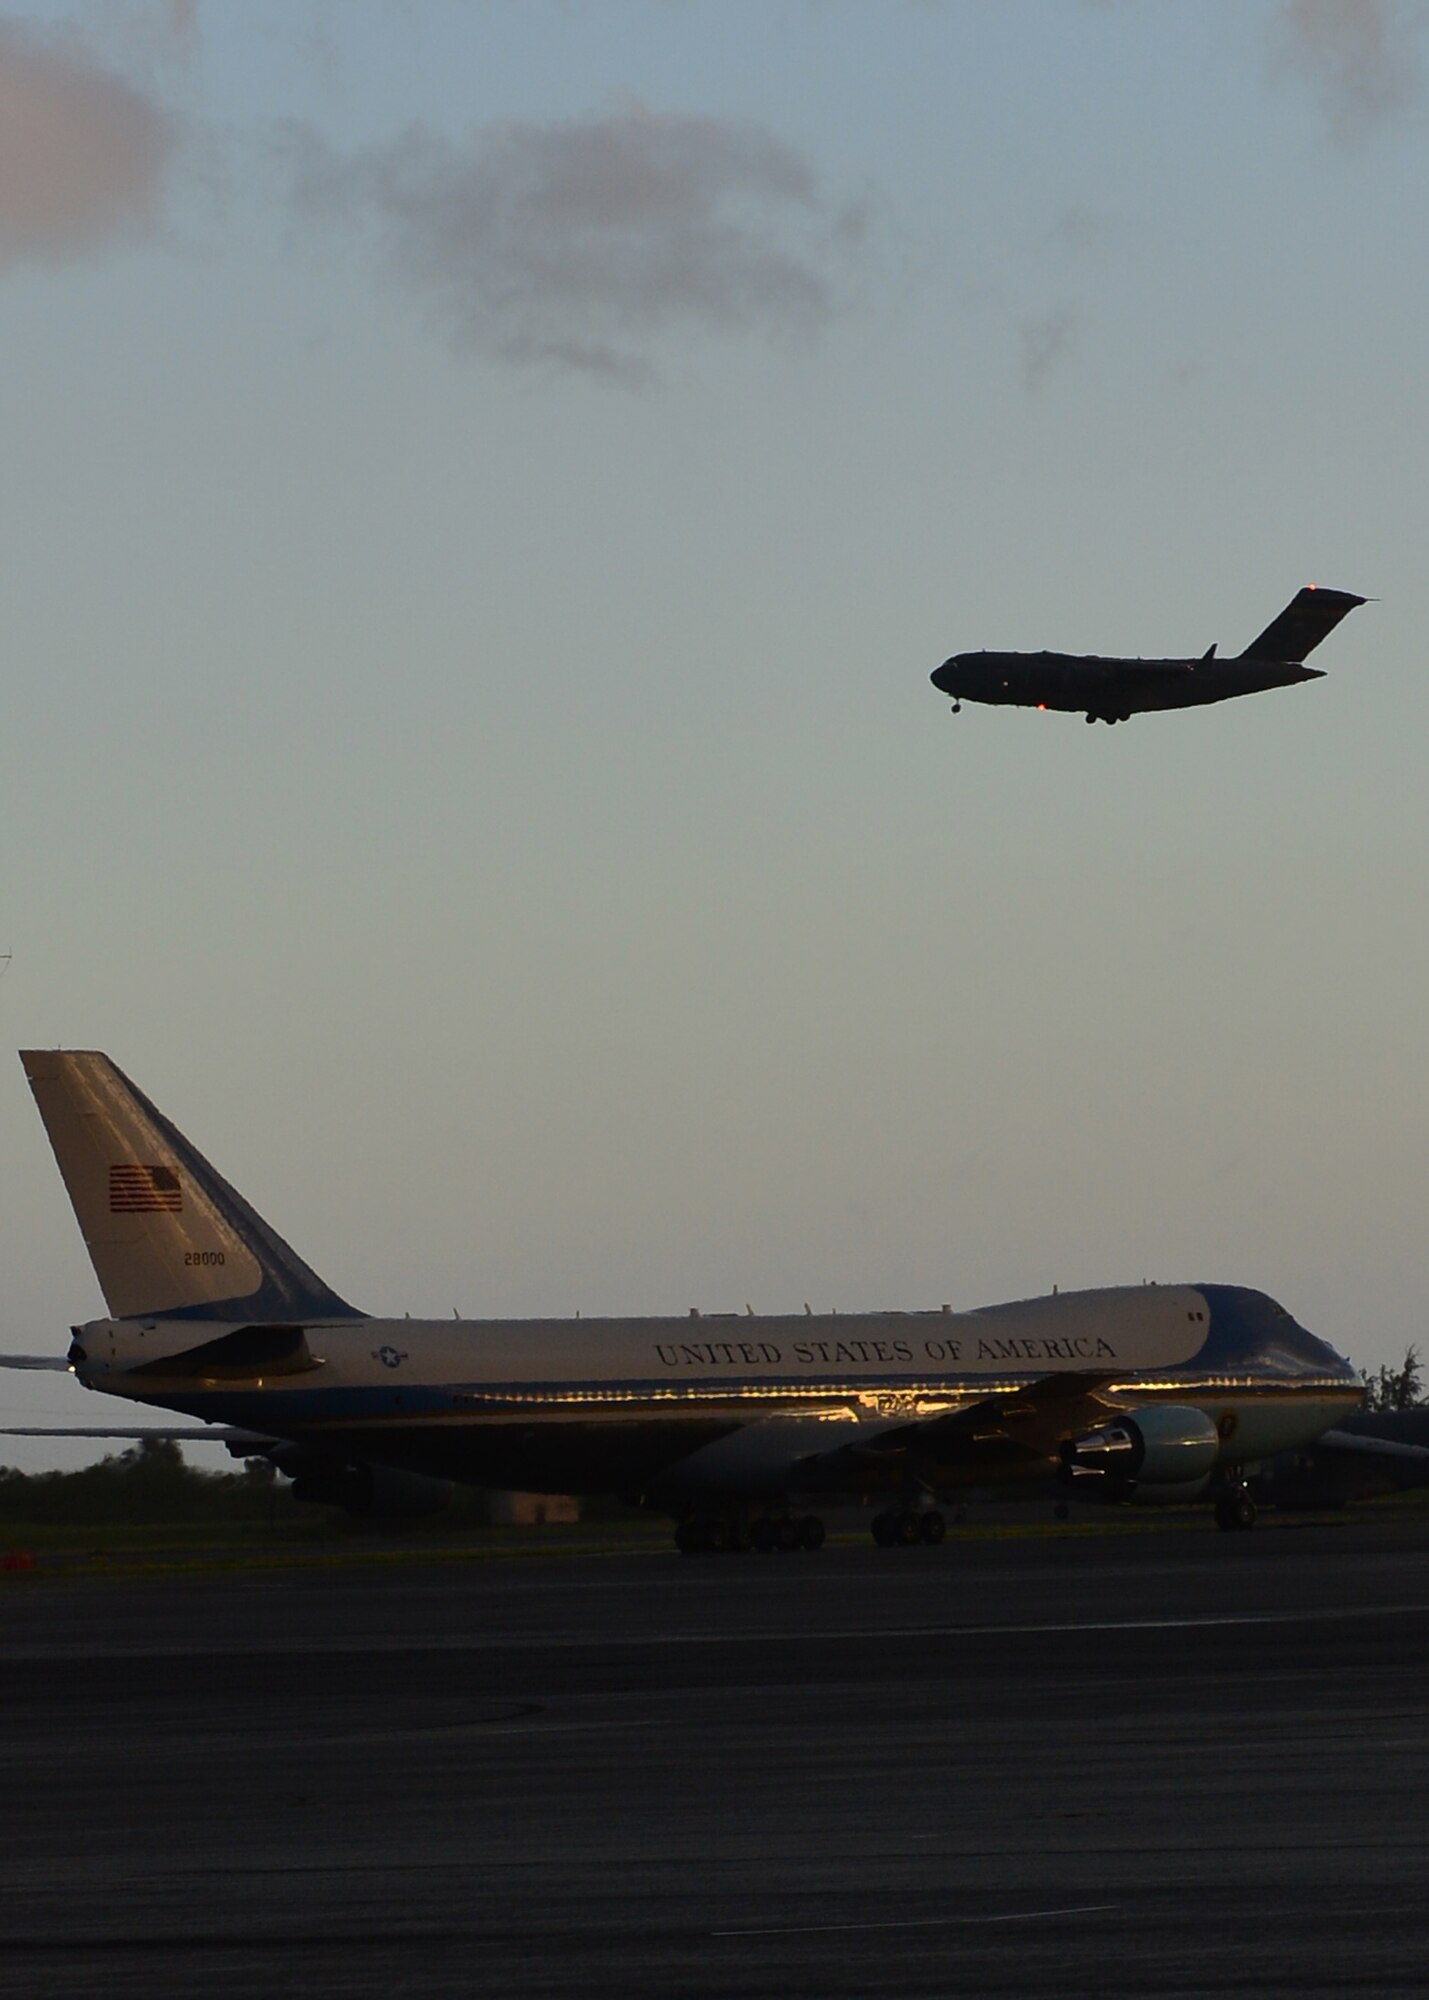 A C-17 Globemaster III from the 535th Airlift Squadron prepares to land as a VC-25A, Air Force One, taxis on Joint Base Pearl Harbor-Hickam, Hawaii, Aug. 31, 2016. President Obama was in Hawaii to speak at the Pacific Island Conference of Leaders and the International Union for Conservation of Nature World Conservation Congress. (U.S. Air Force Photo by Tech. Sgt. Aaron Oelrich/Released) 